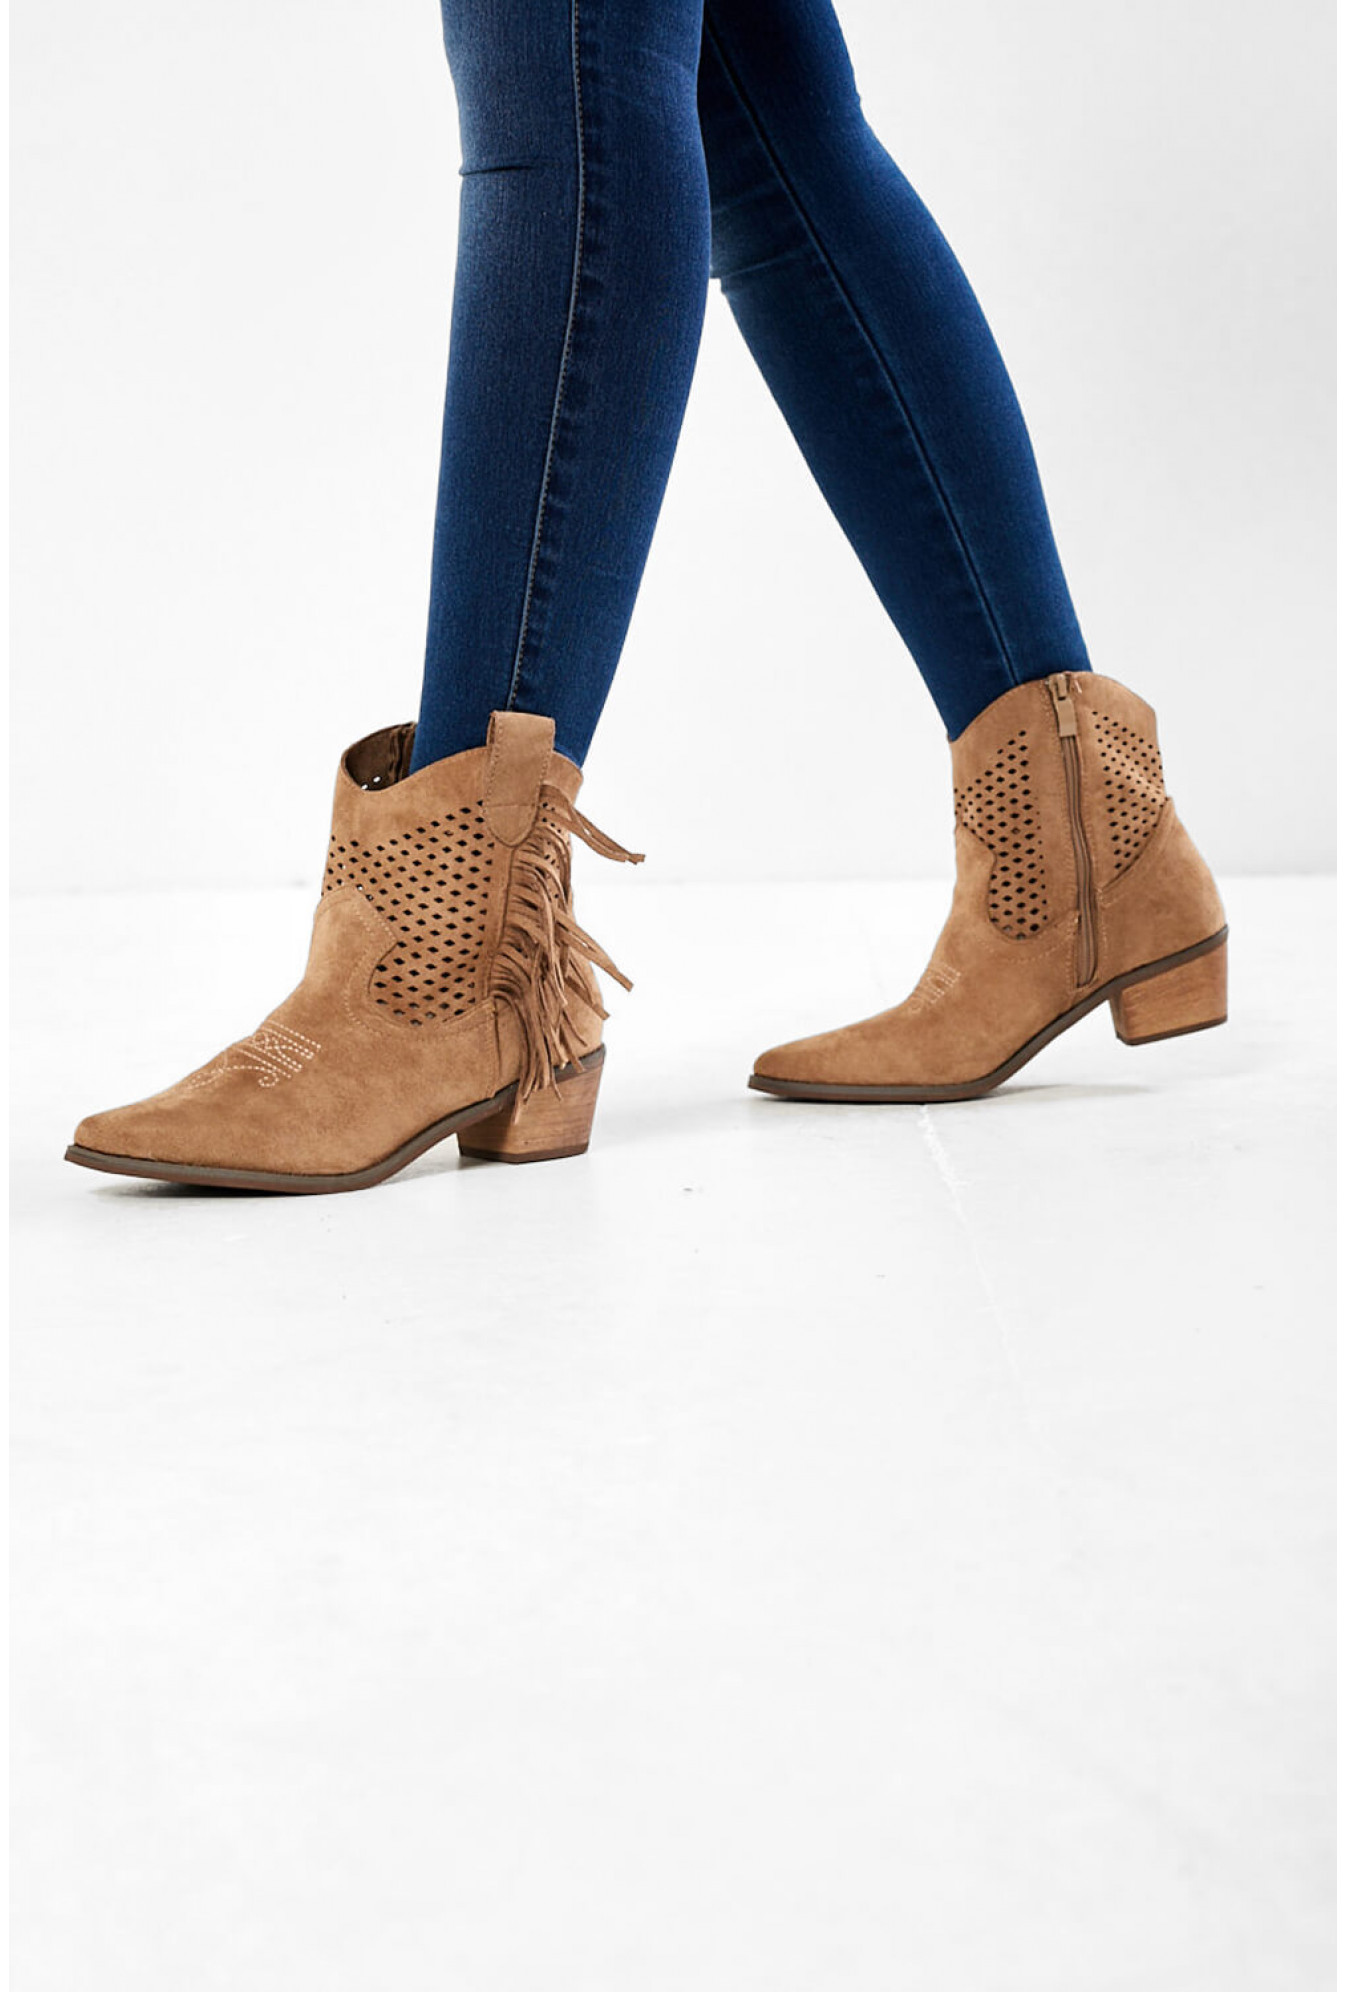 Amber Tassle Ankle Boots in Beige